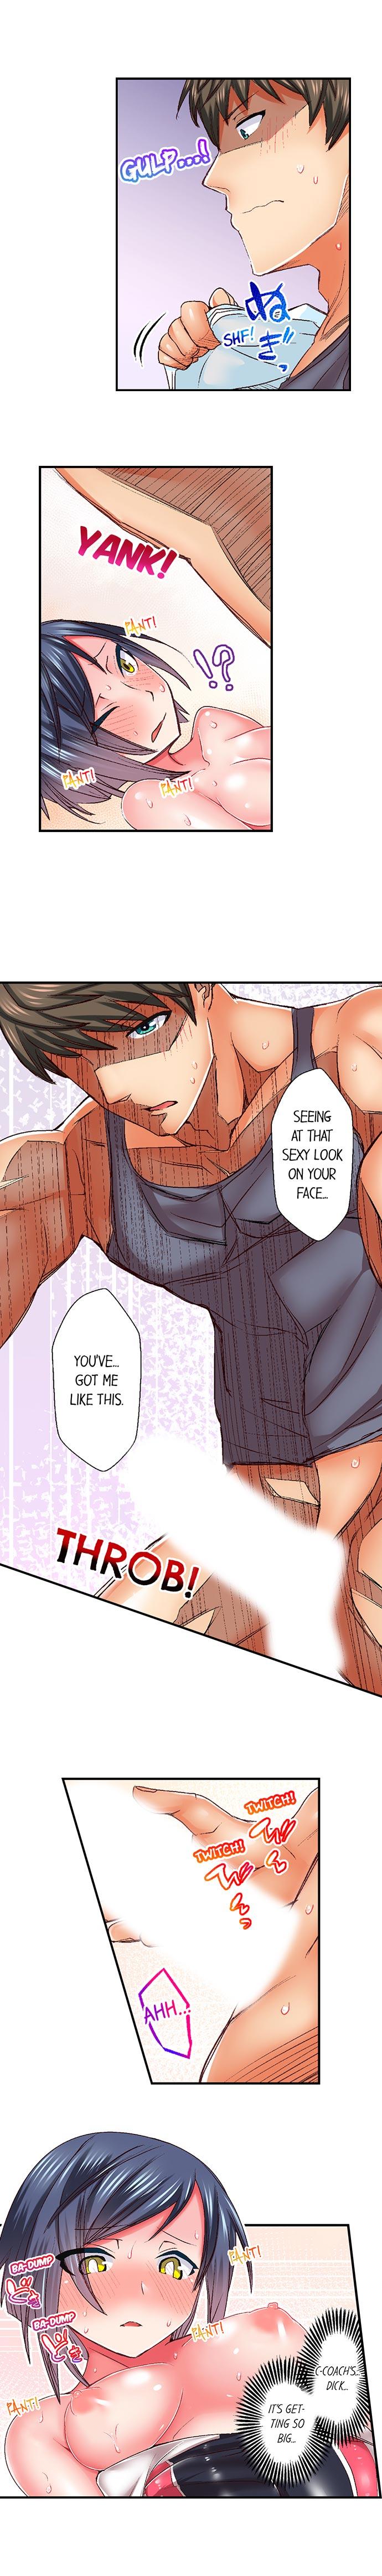 Athlete's Strong Sex Drive Ch. 1 - 9 24